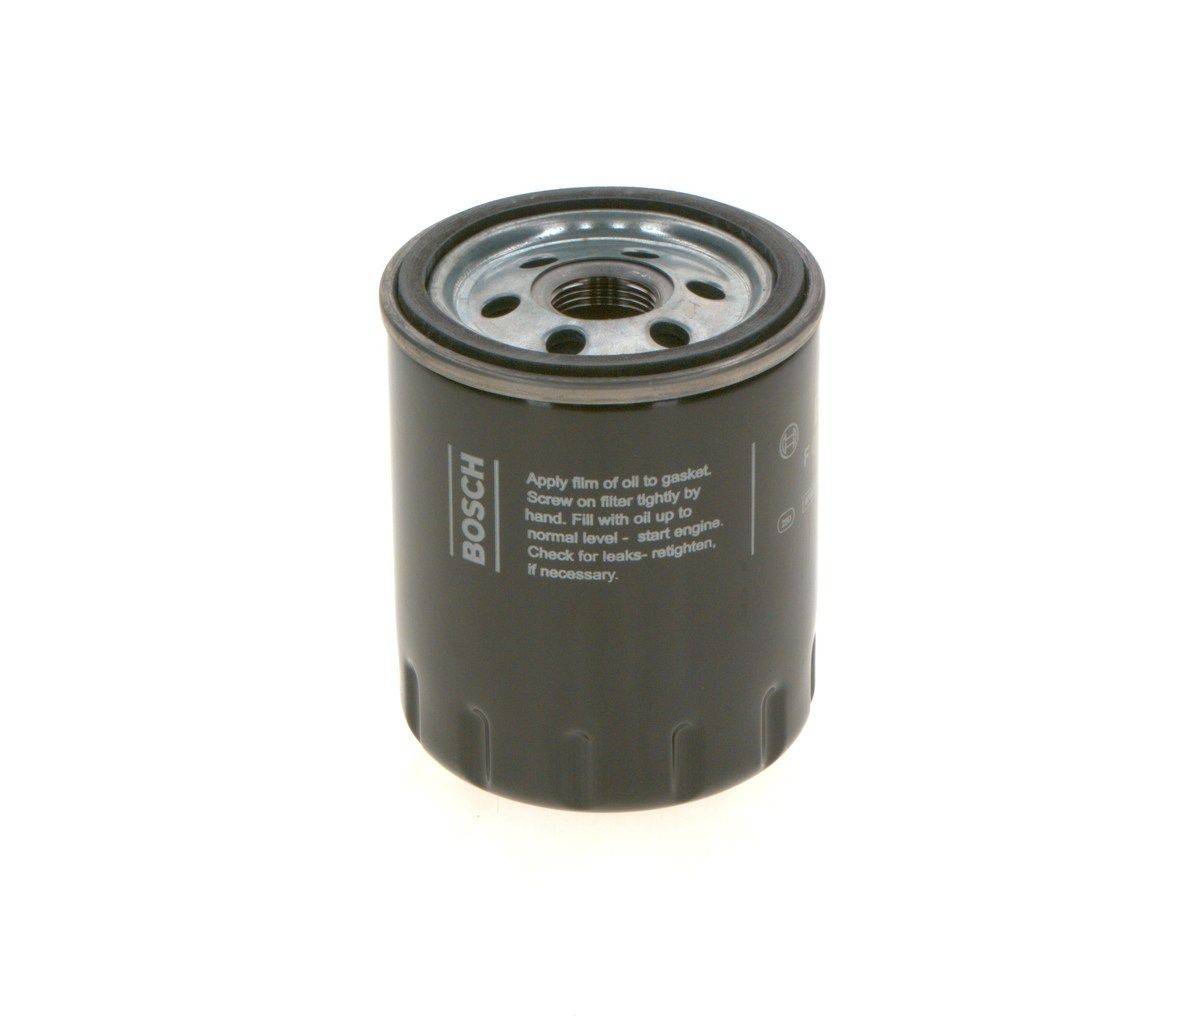 F026407268 Oil filter P 7268 BOSCH M 20 x 1,5, with one anti-return valve, Spin-on Filter